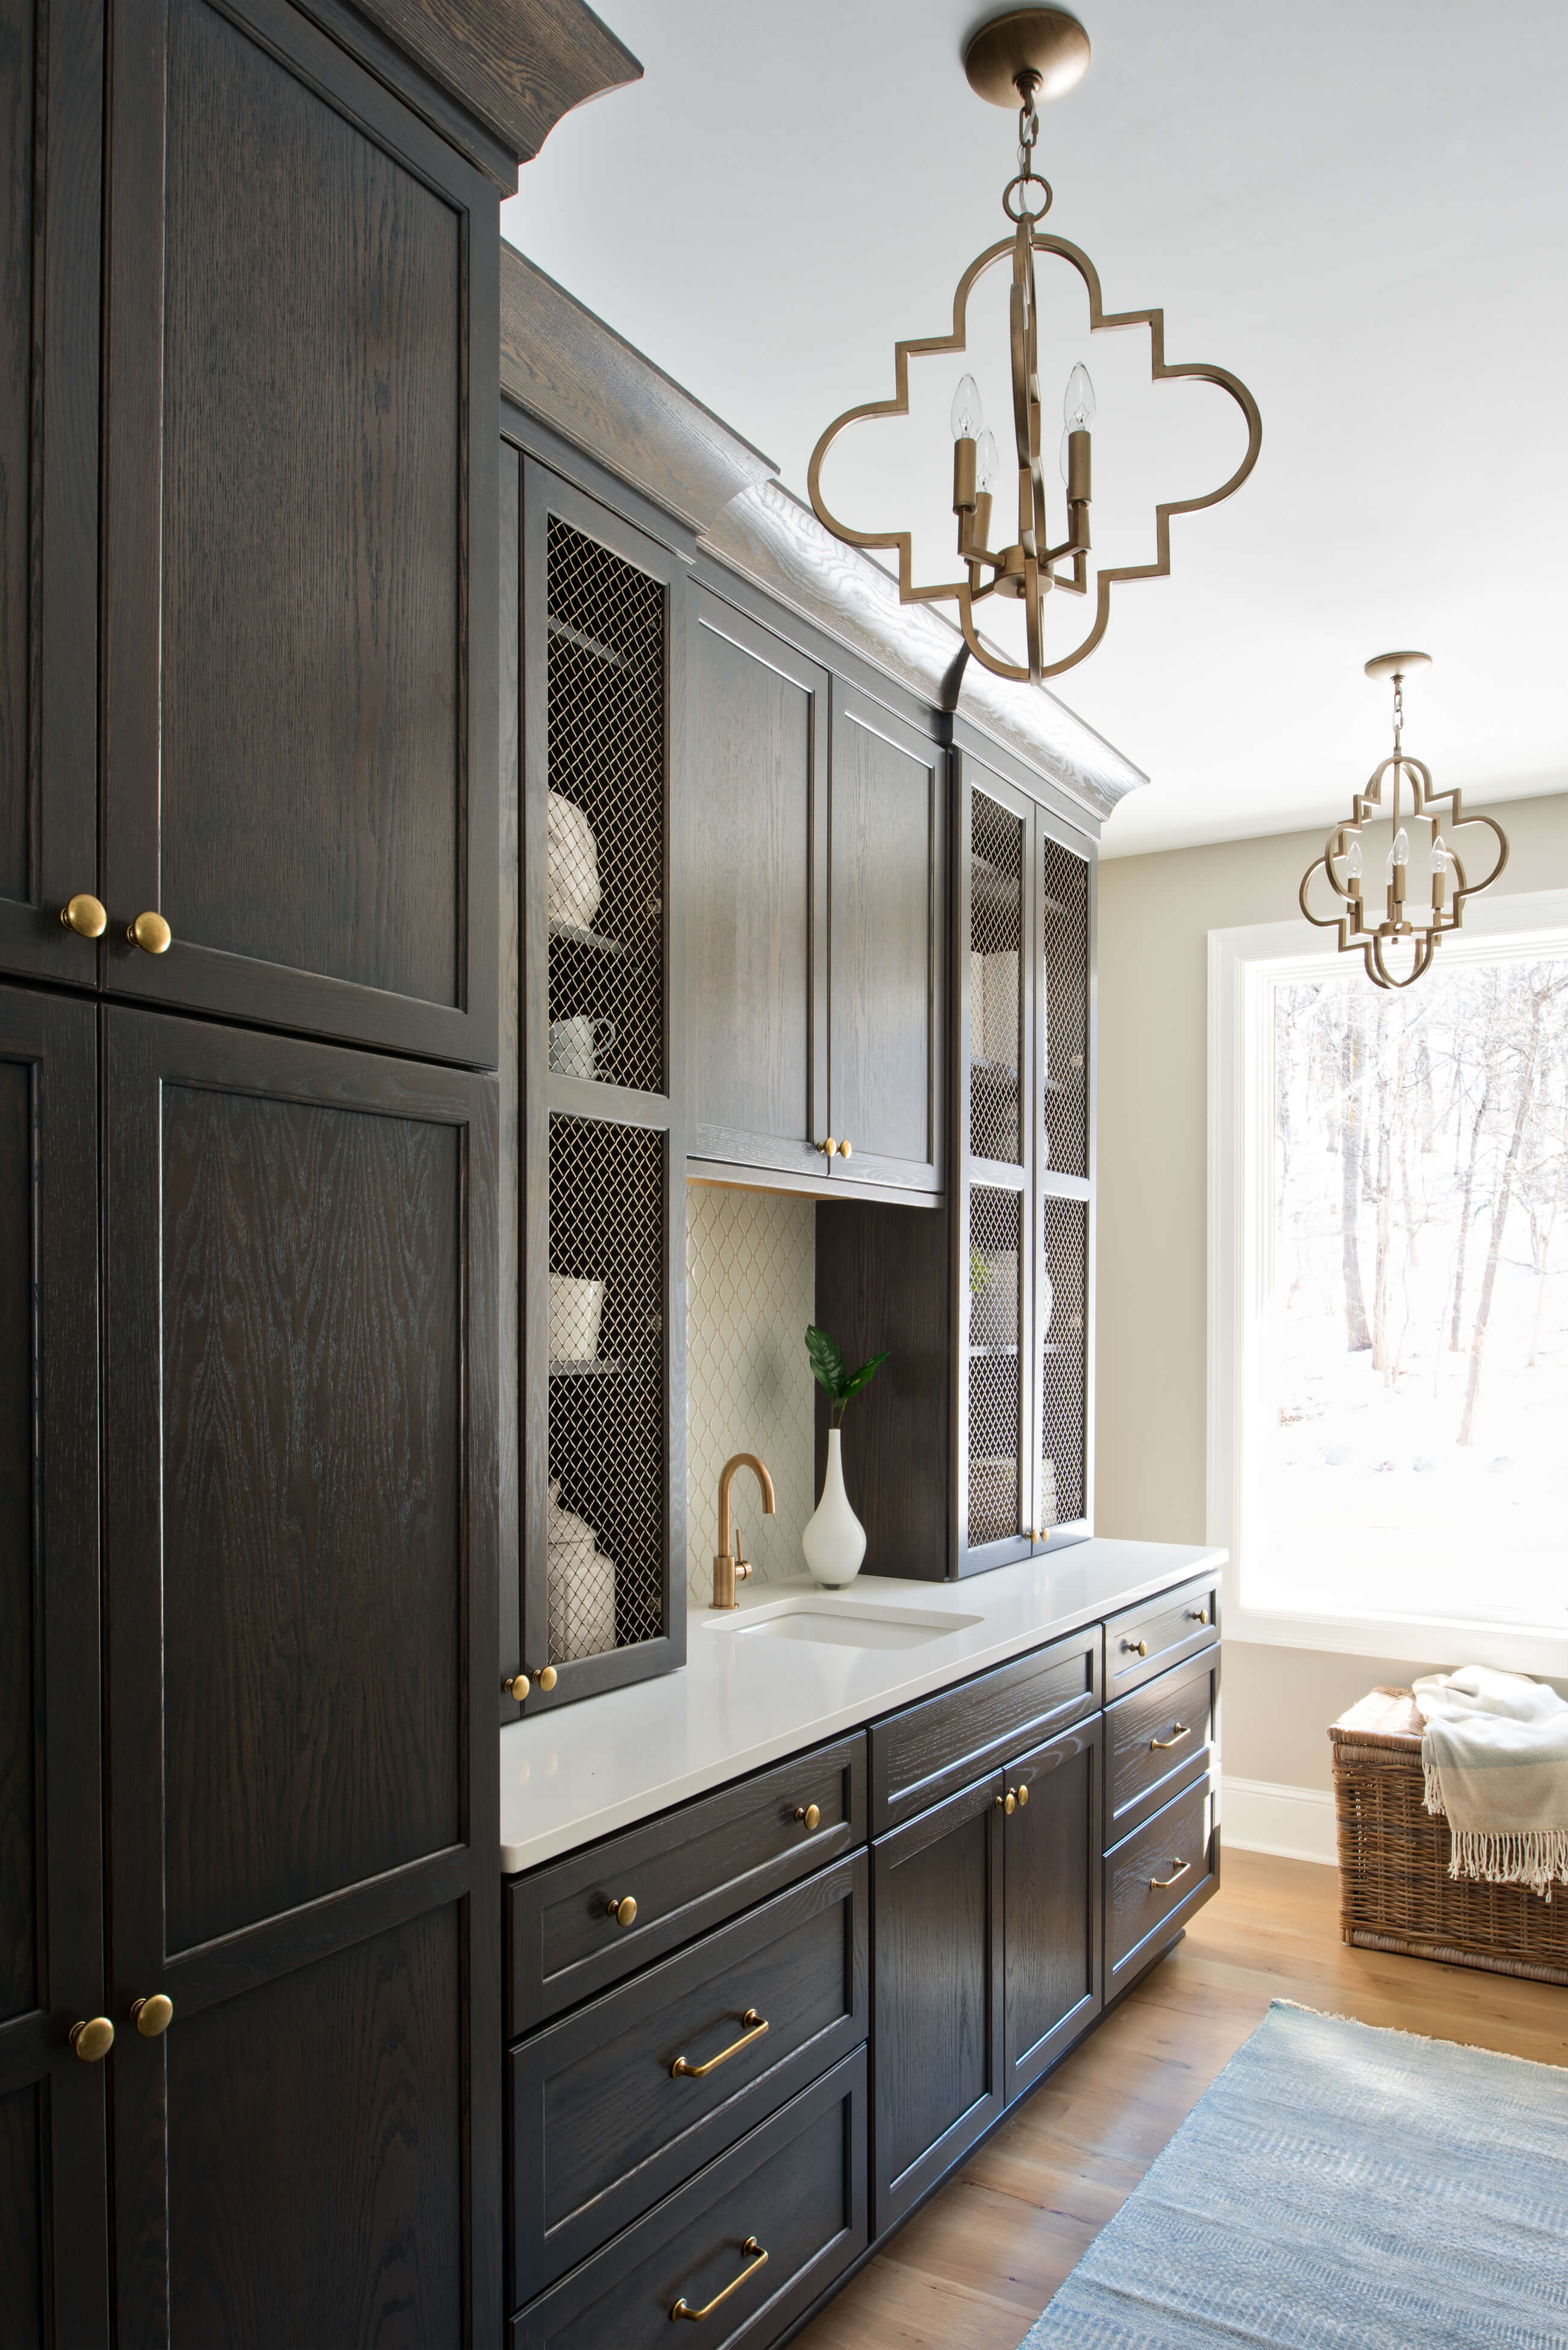 A dark gray stained oak butler's pantry with metal inserts in the doors for a decorative display of the homeowner's serveware collection.